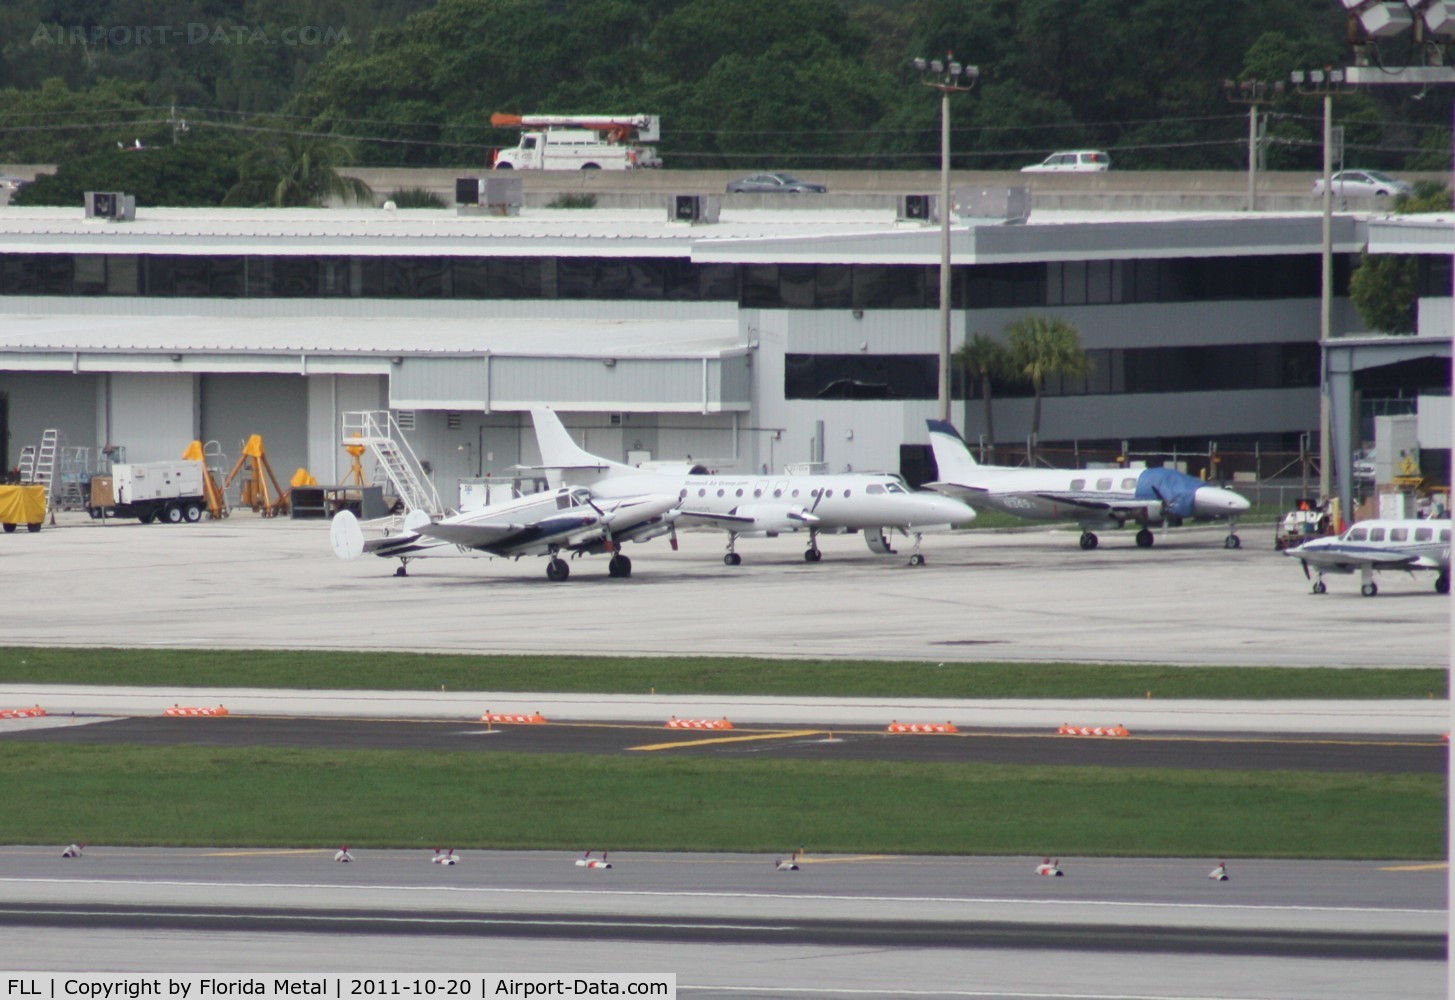 Fort Lauderdale/hollywood International Airport (FLL) - Mix of planes on the GA ramp including a Metro and a Beech 18